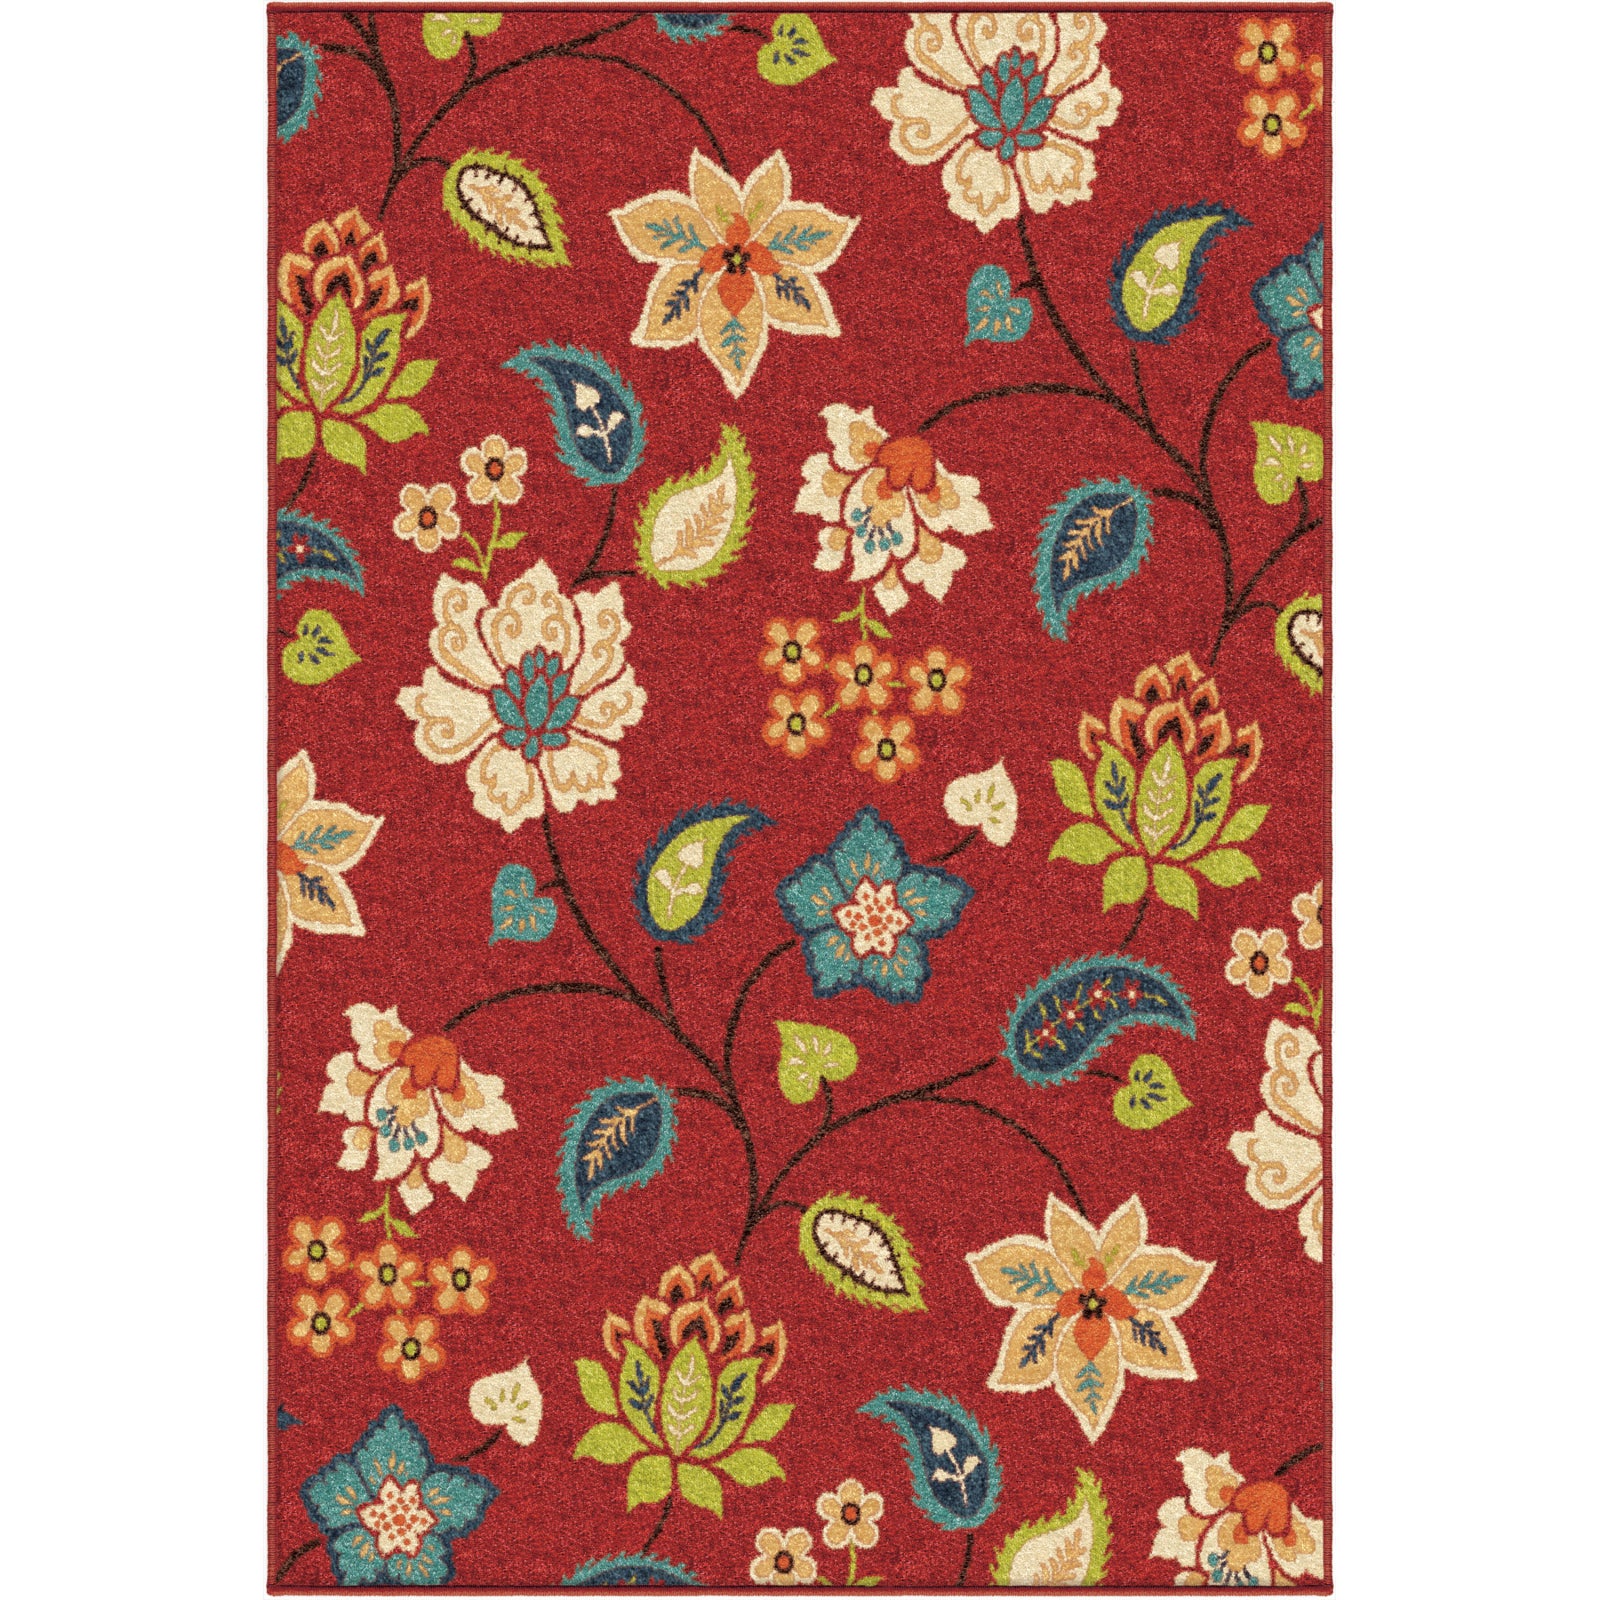 Orian Rugs Promise St Thomas Red Area Rug main image